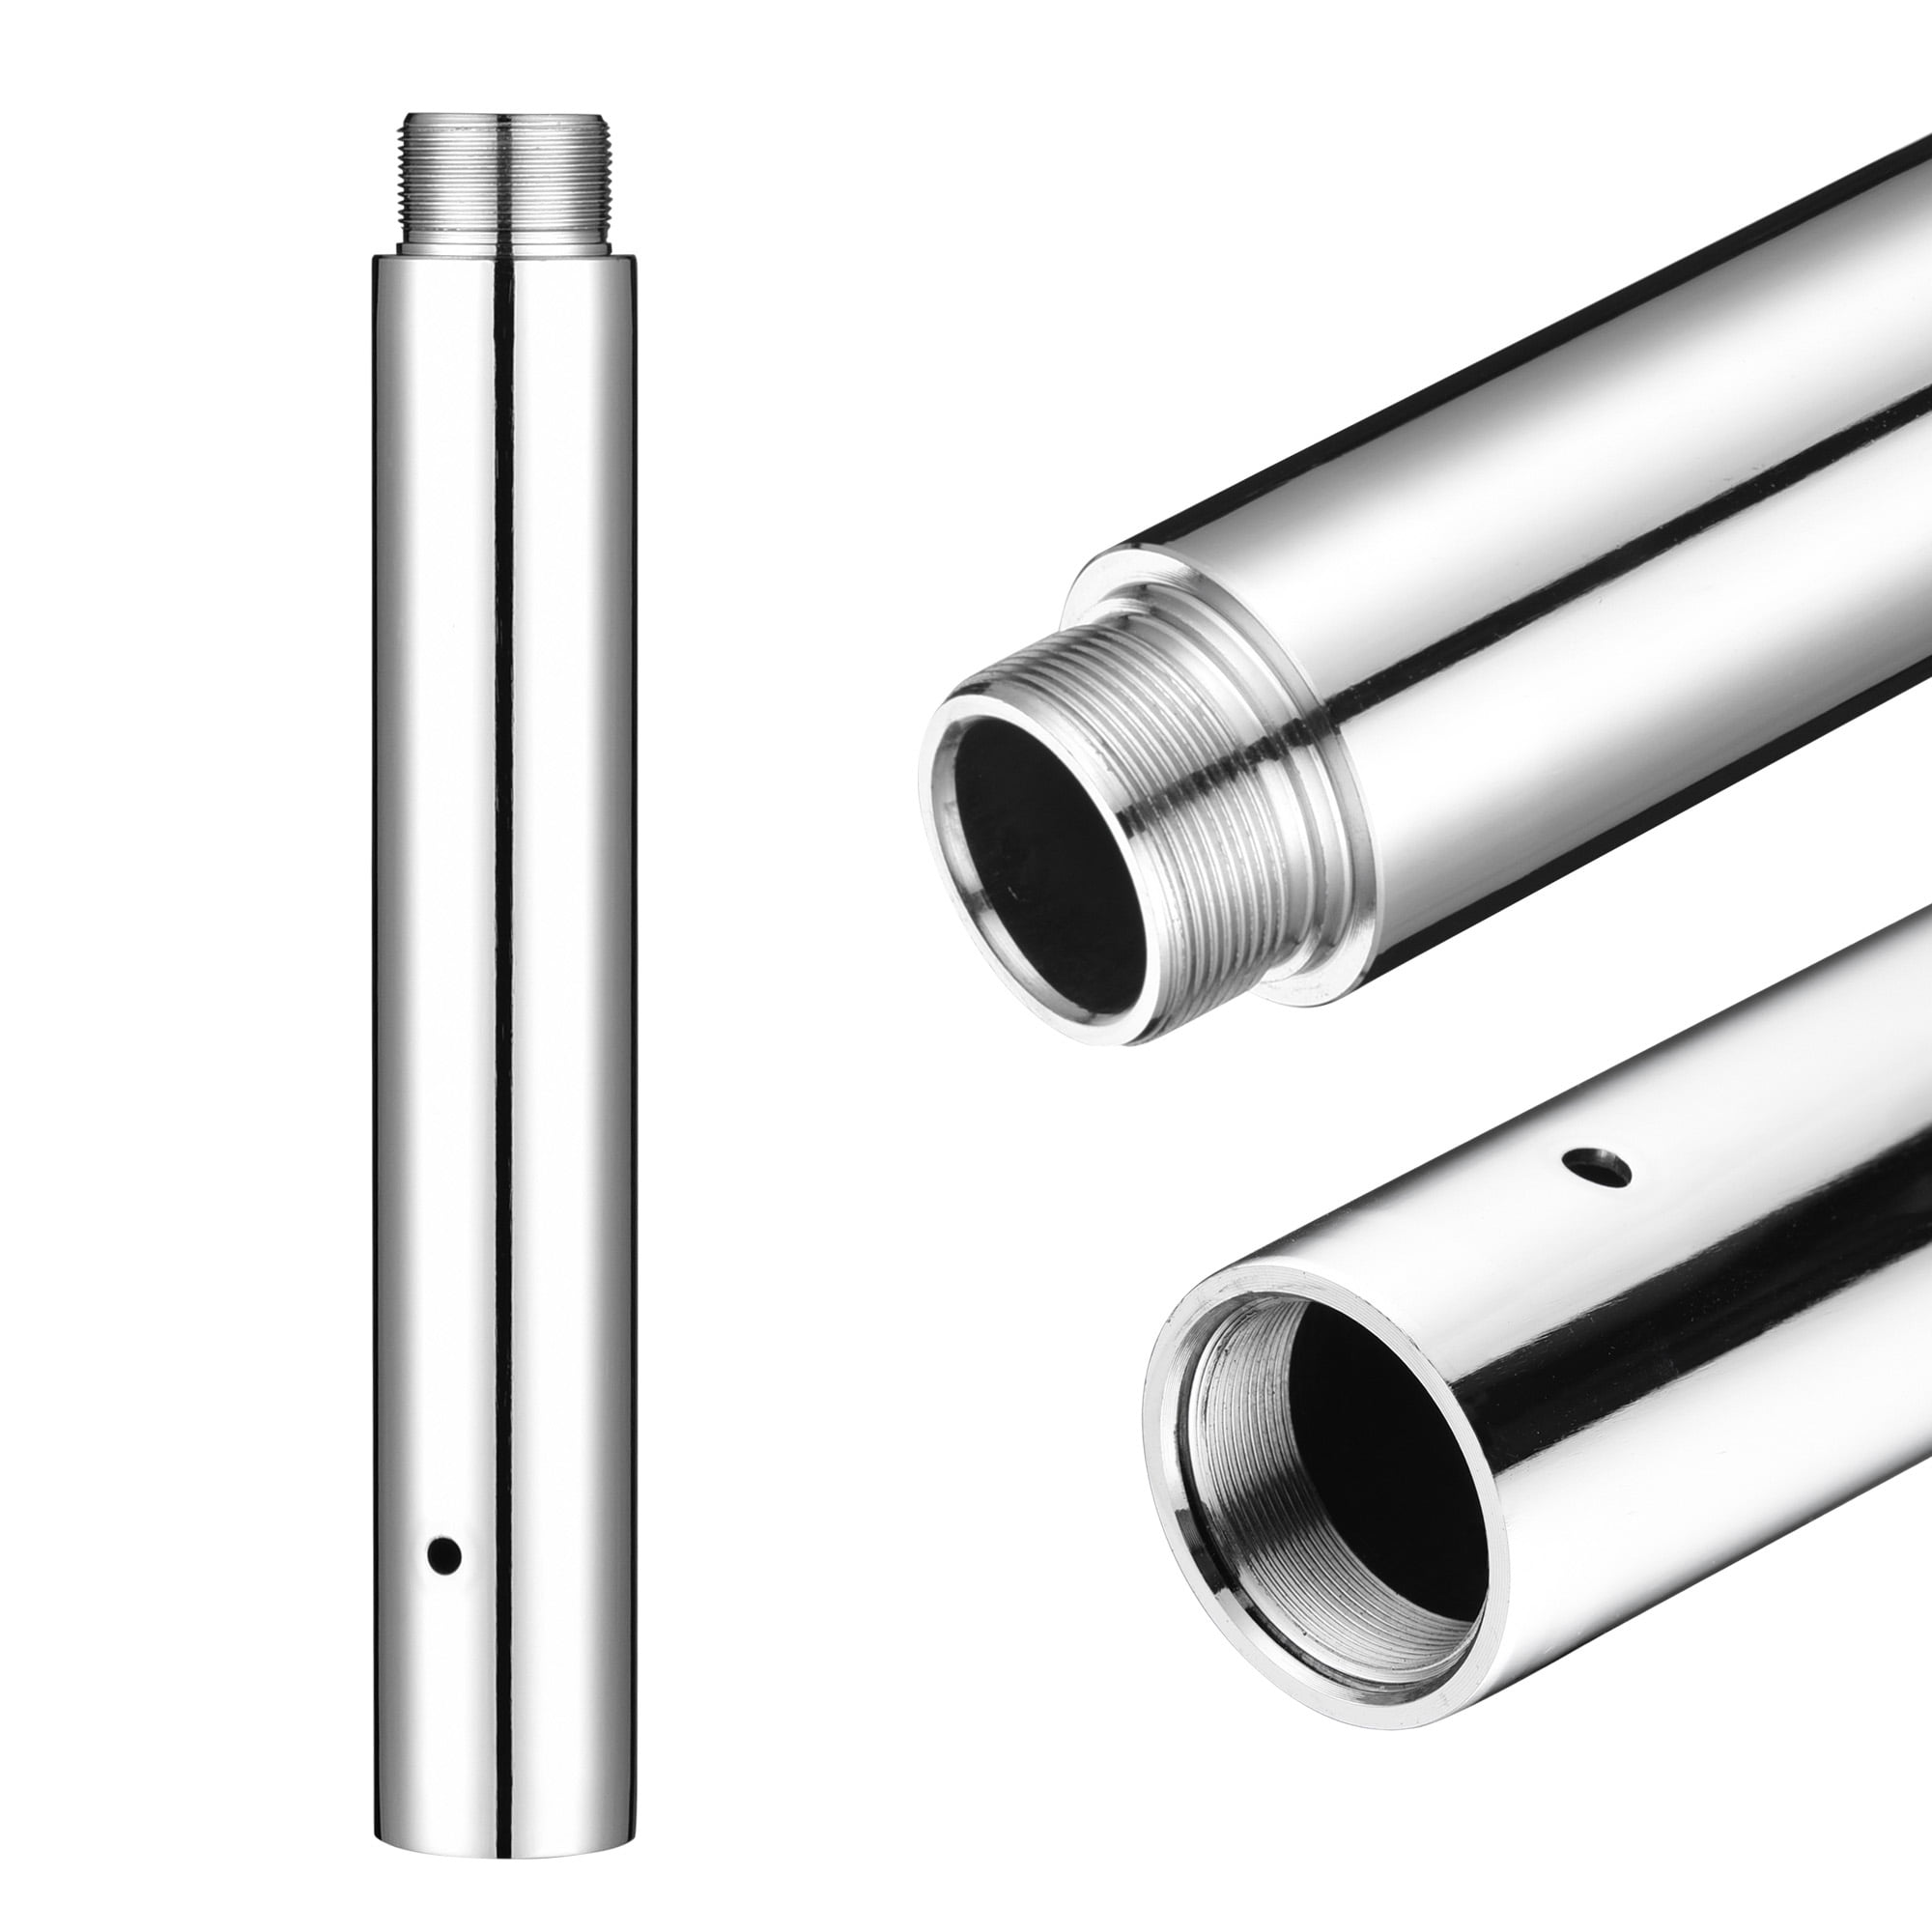 Yescom 262 mm Chrome Stainless Steel Dancing Pole Extension for 45 mm  Professional Pole Fitness Spinning Pole Accessories, Silver